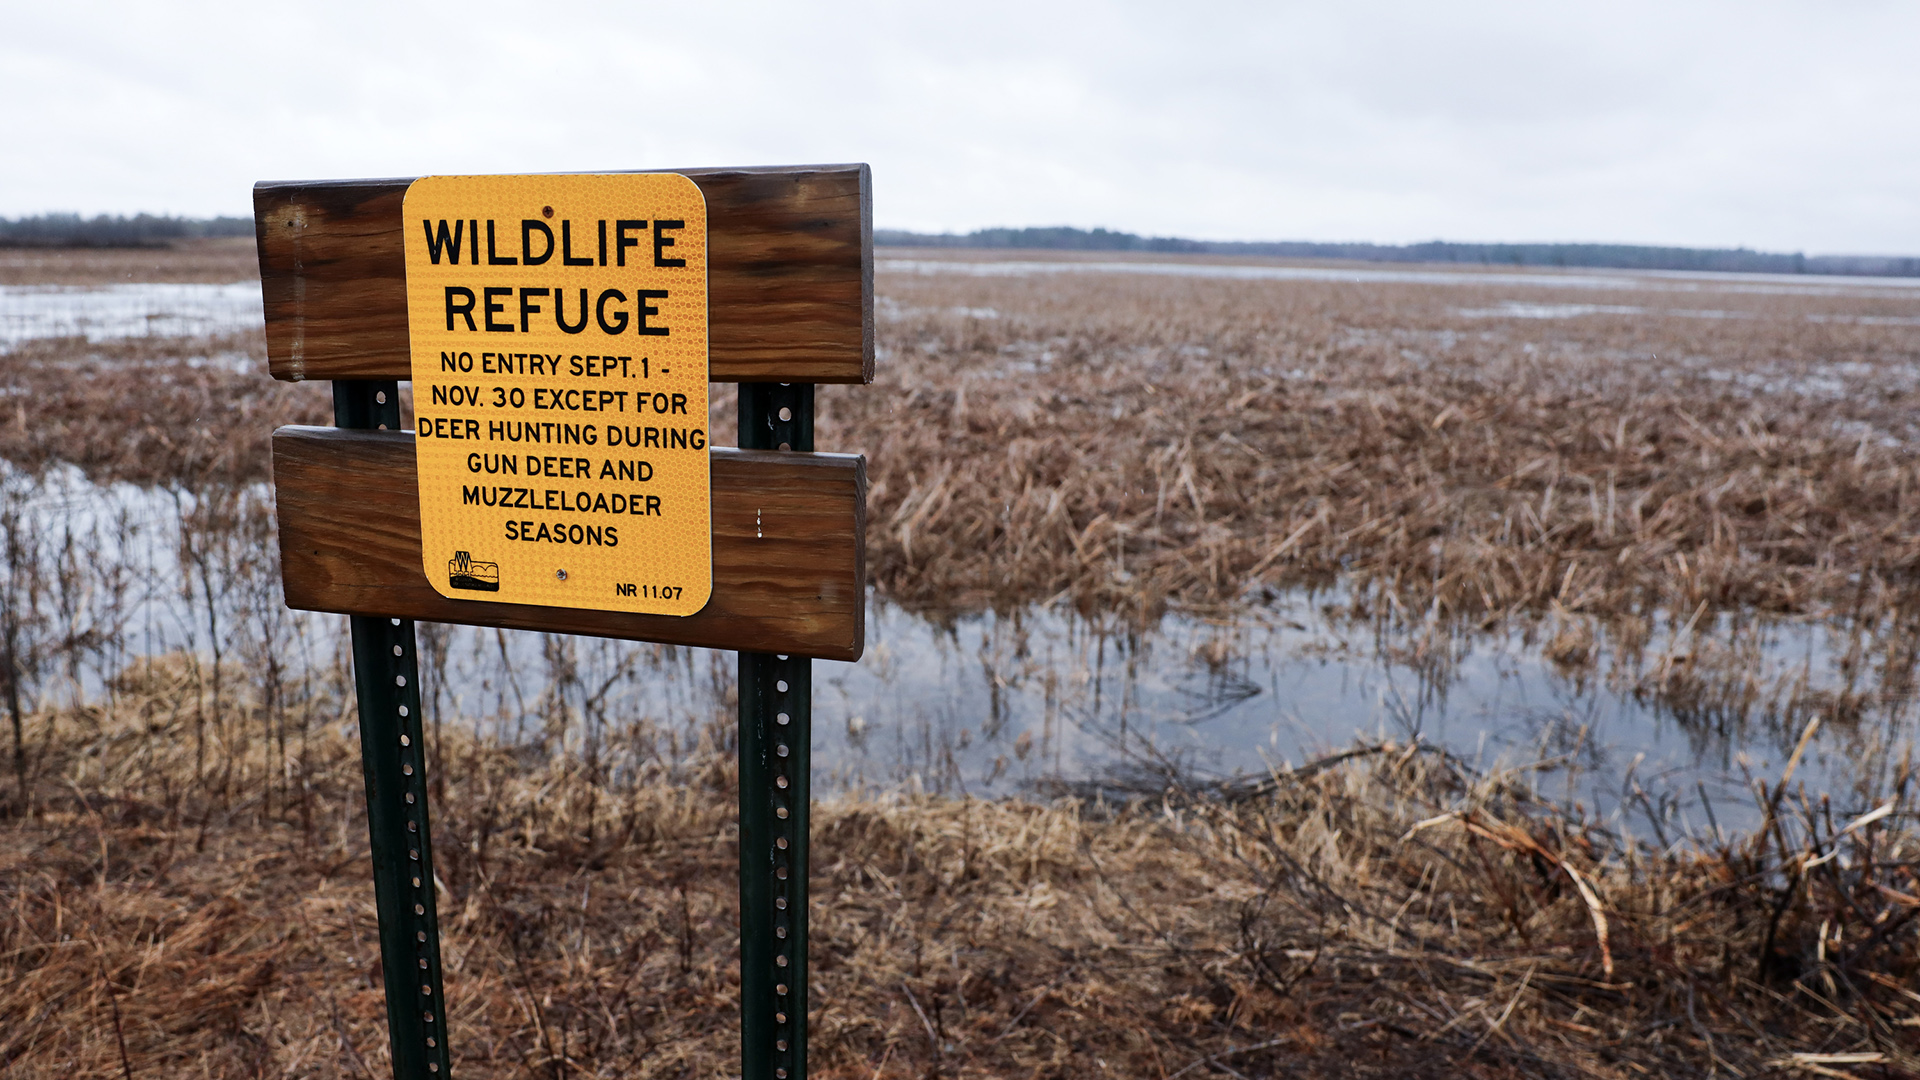 A sign reading "Wildlife Refuge" and "No Entry Sept. 1 - Nov. 30 Except Deer Hunting During Gun Deer and Muzzleloader Seasons" is mounted to two wood boards on perforated metal stakes in front of wetlands with areas of marsh and standing water, with wooded lands at the horizon.